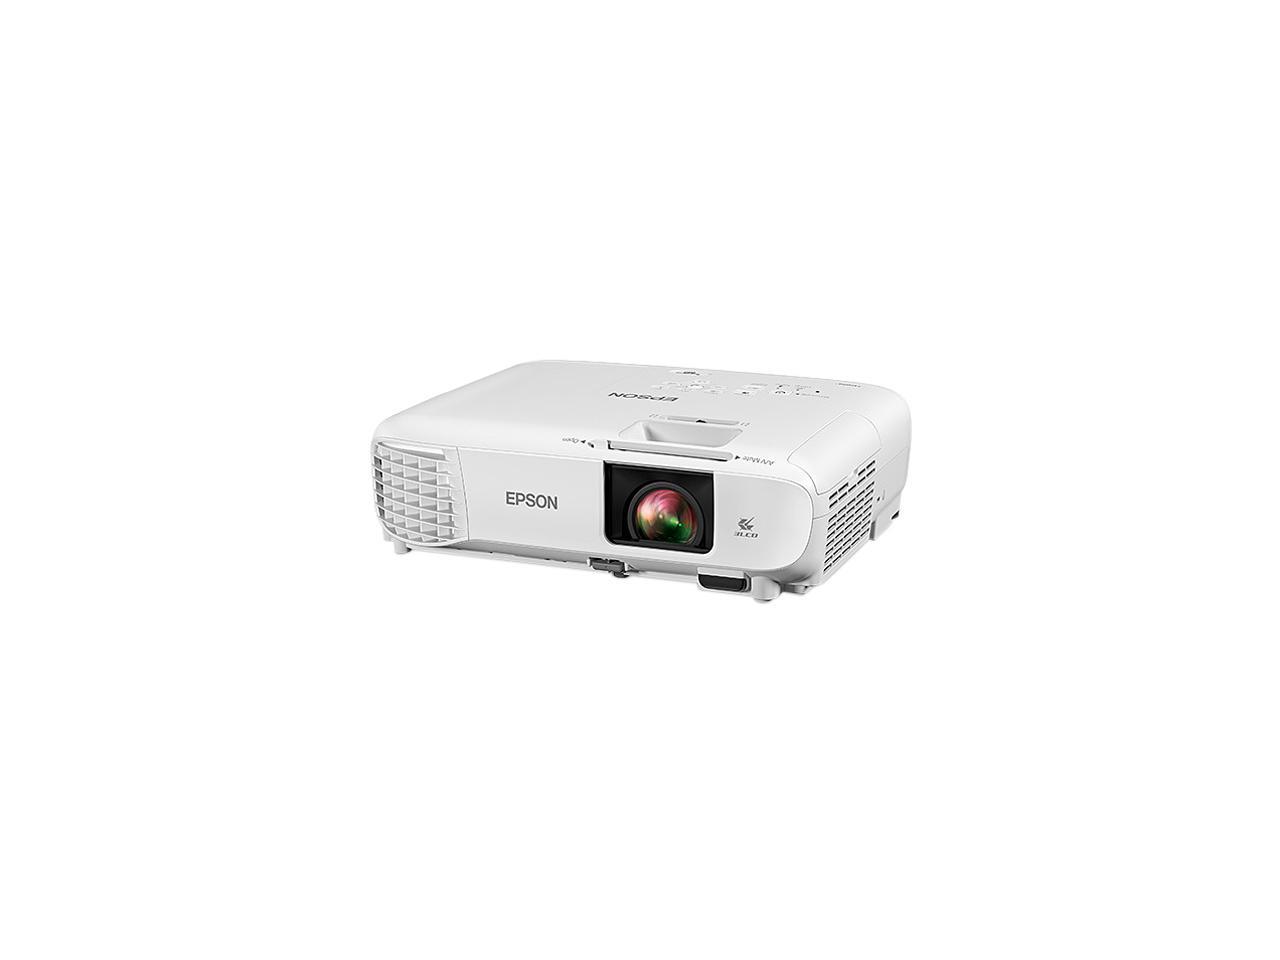 Epson Home Cinema 880 3LCD 1080p Projector, Built-in Speaker, 16,000:1 Contrast Ratio, HDMI - image 5 of 5